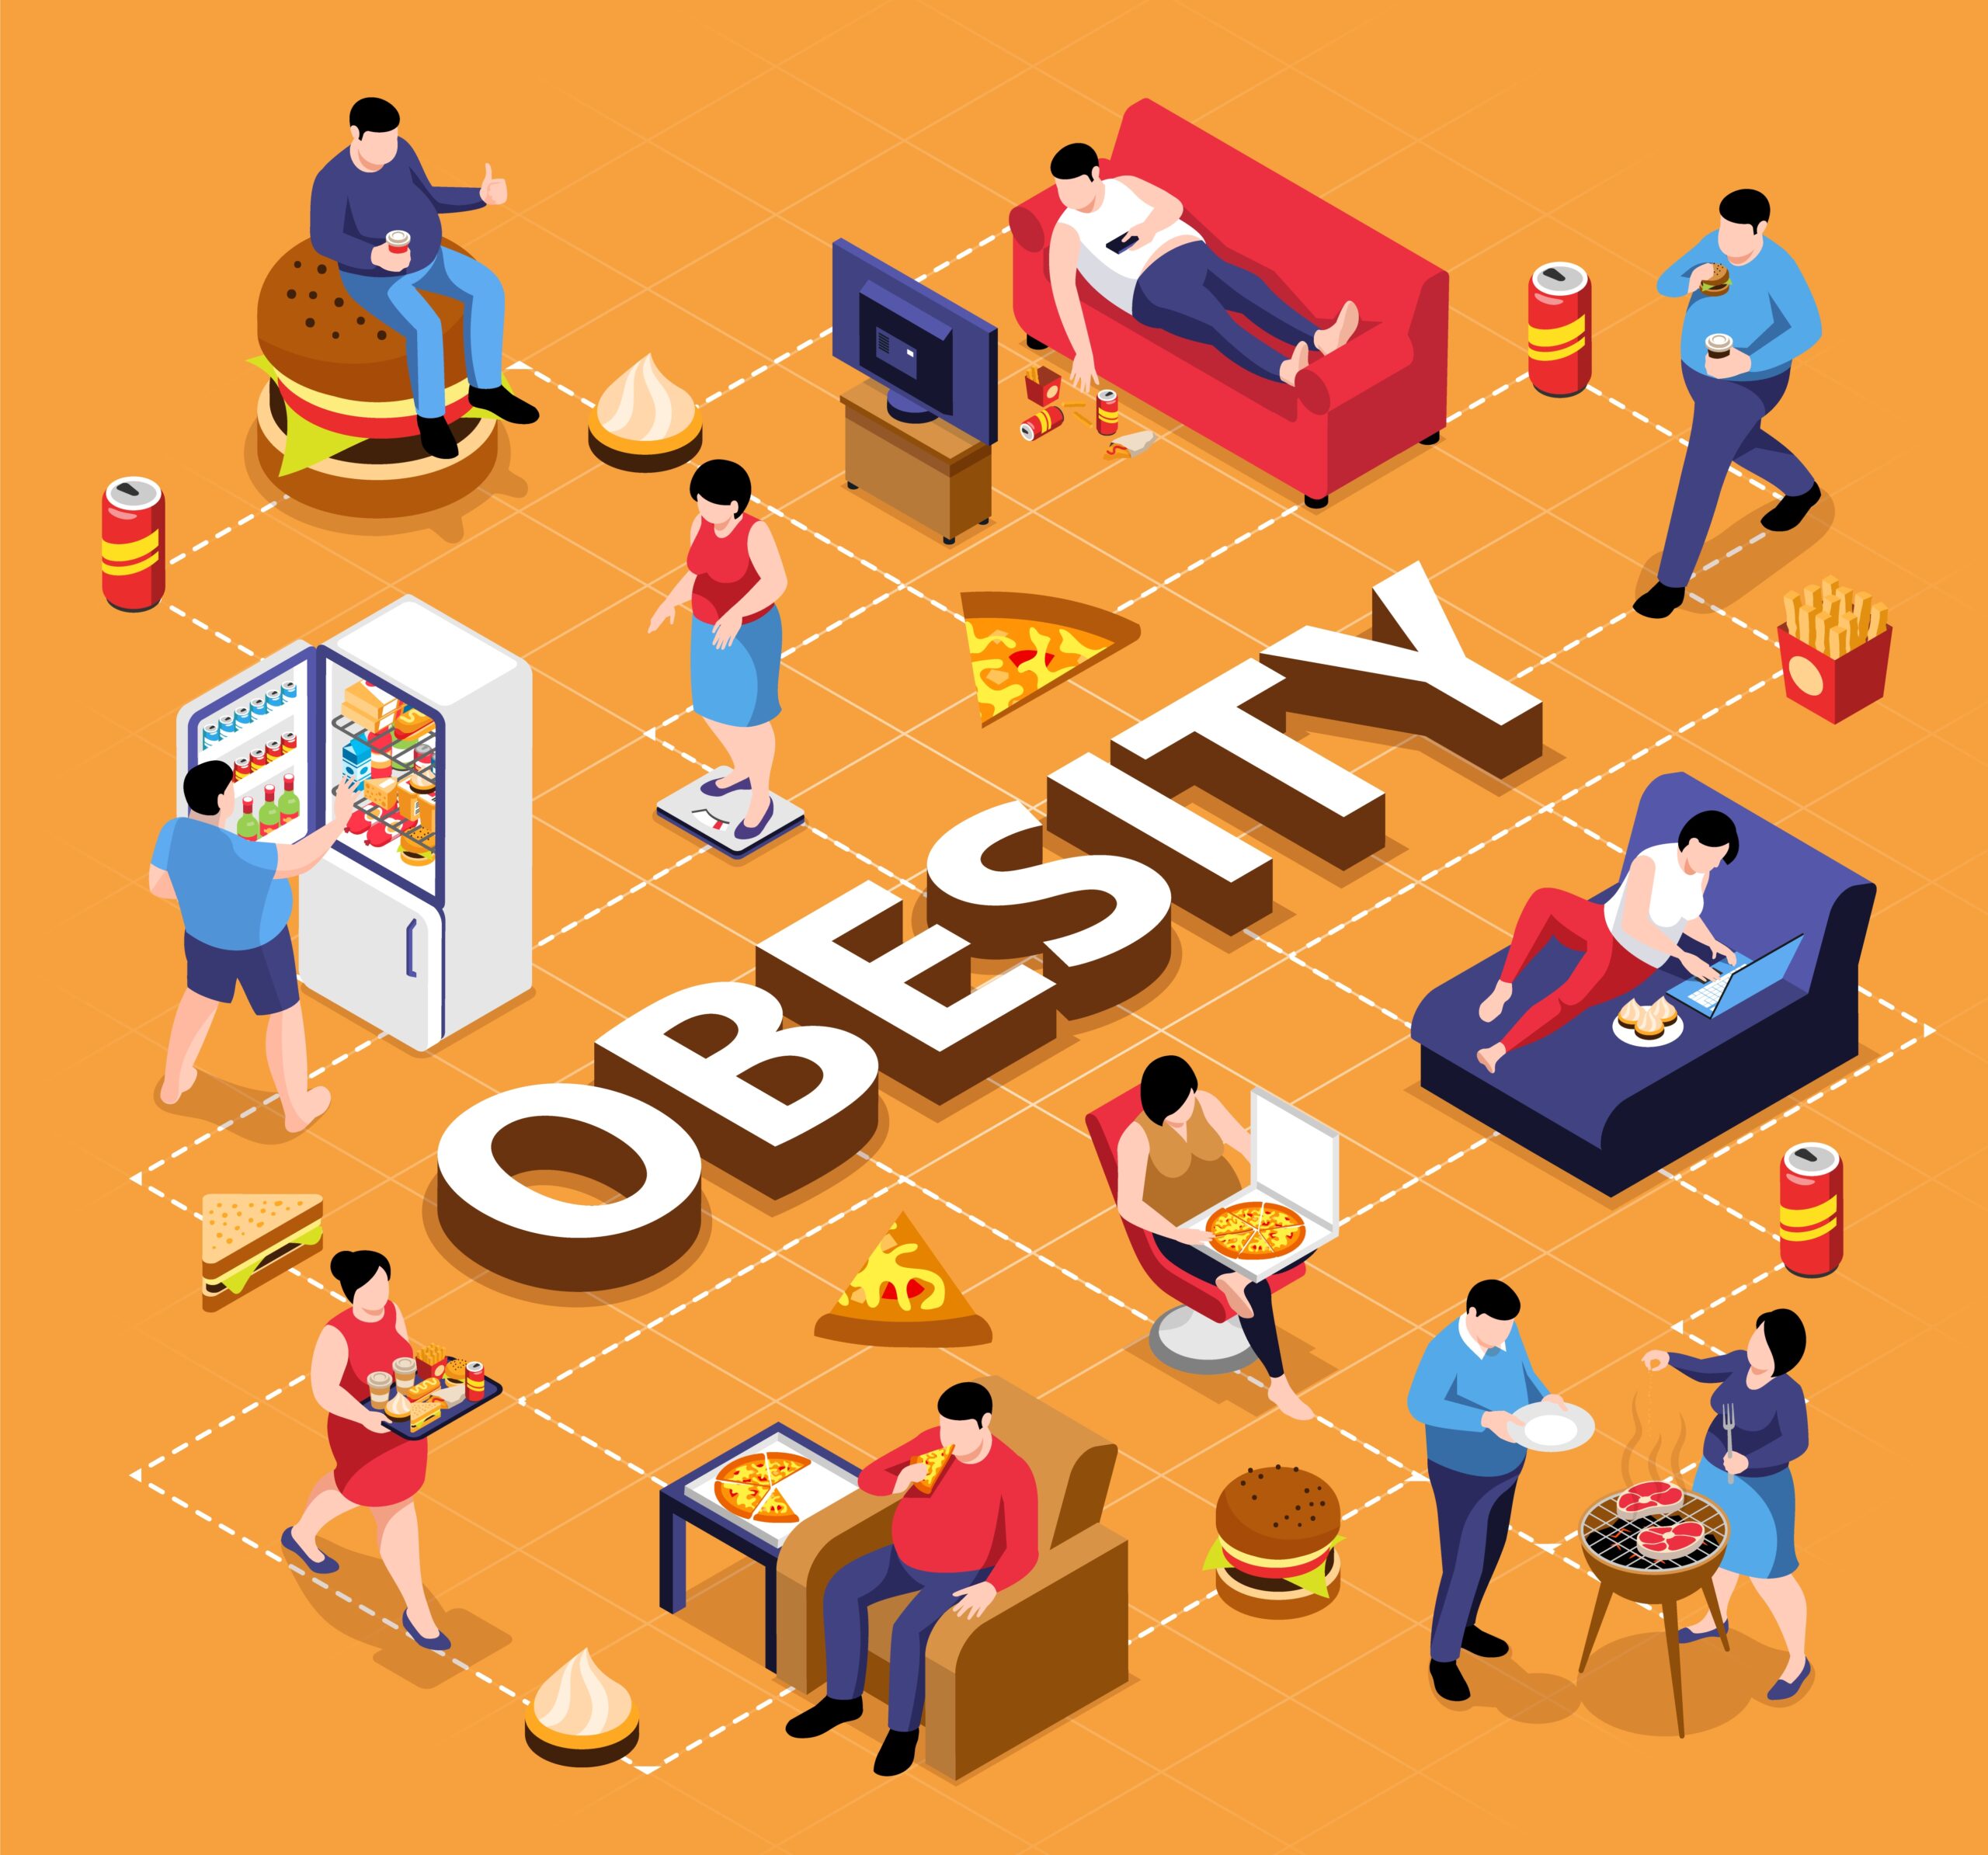 Obesity: 1 of A Growing Health Crisis